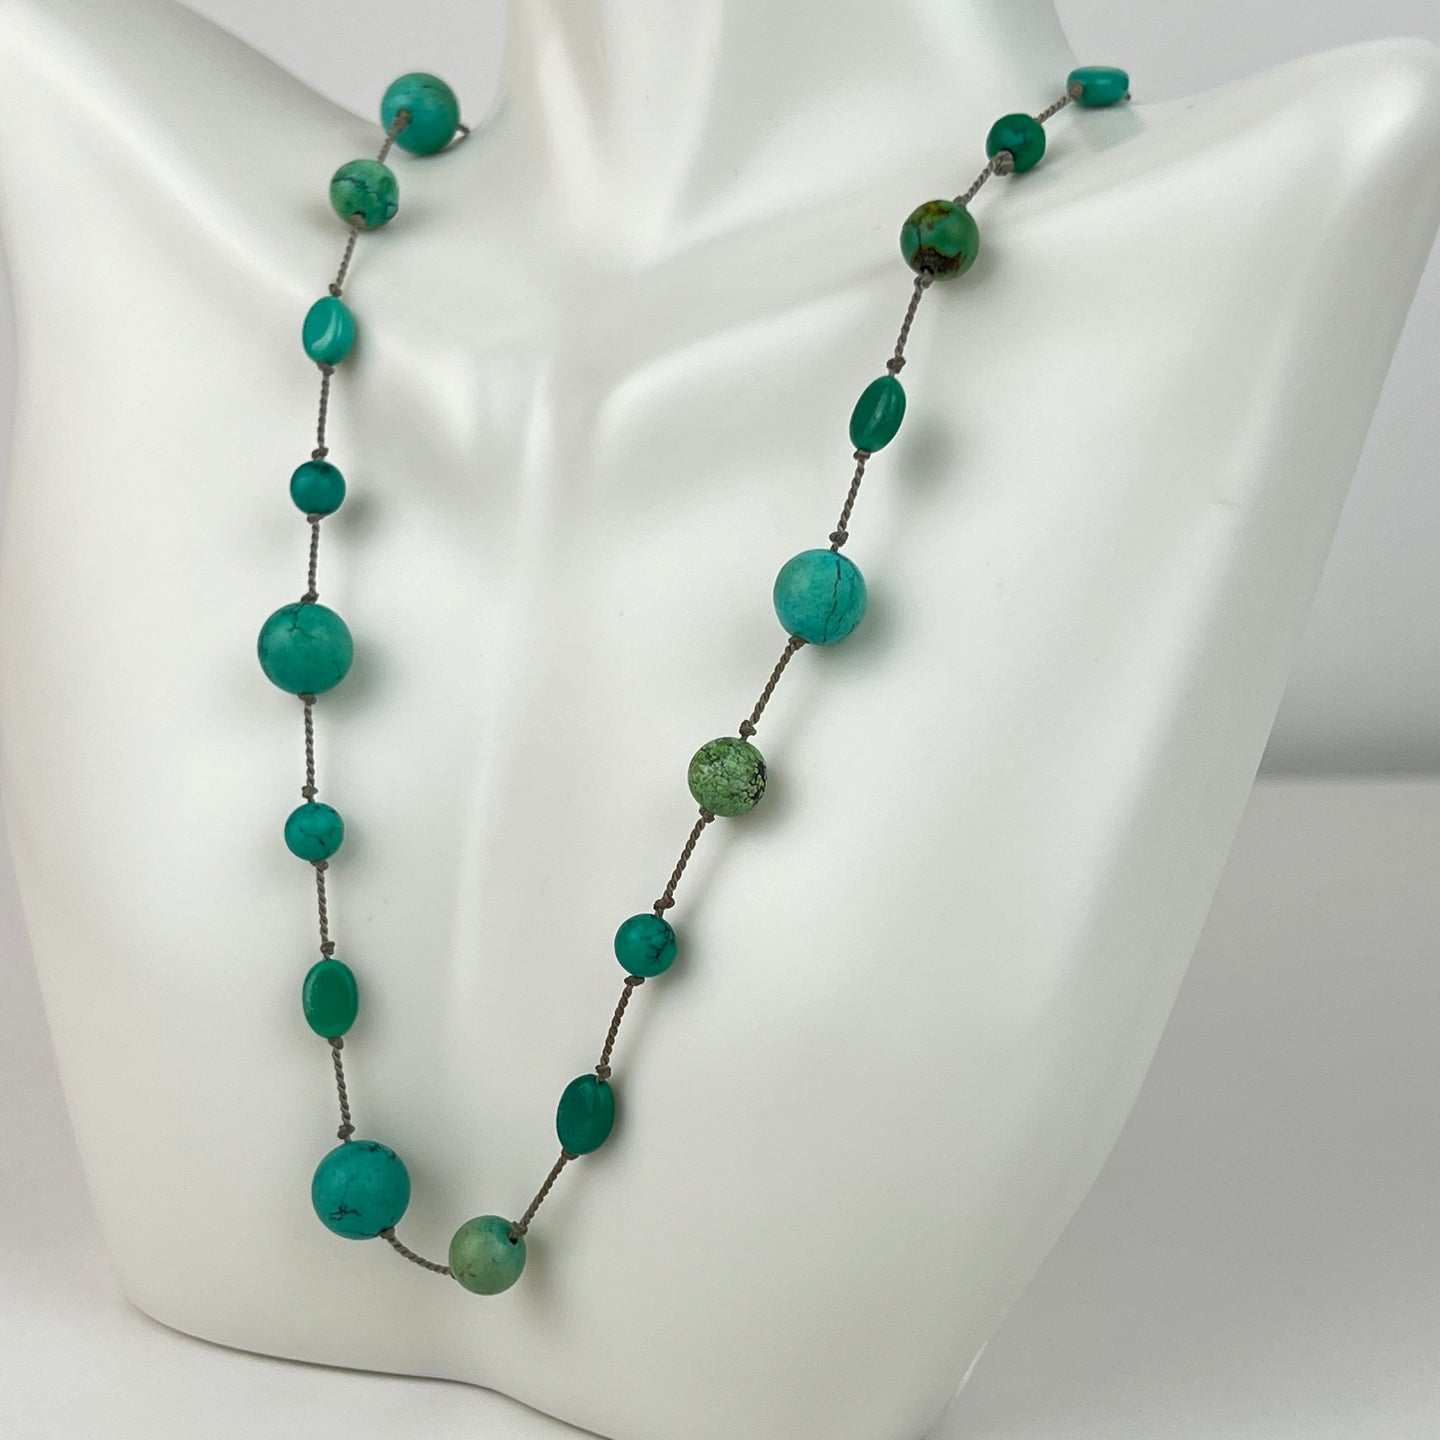 Genuine Turquoise Knotted Bead Necklace 925 Silver Loop Clasp